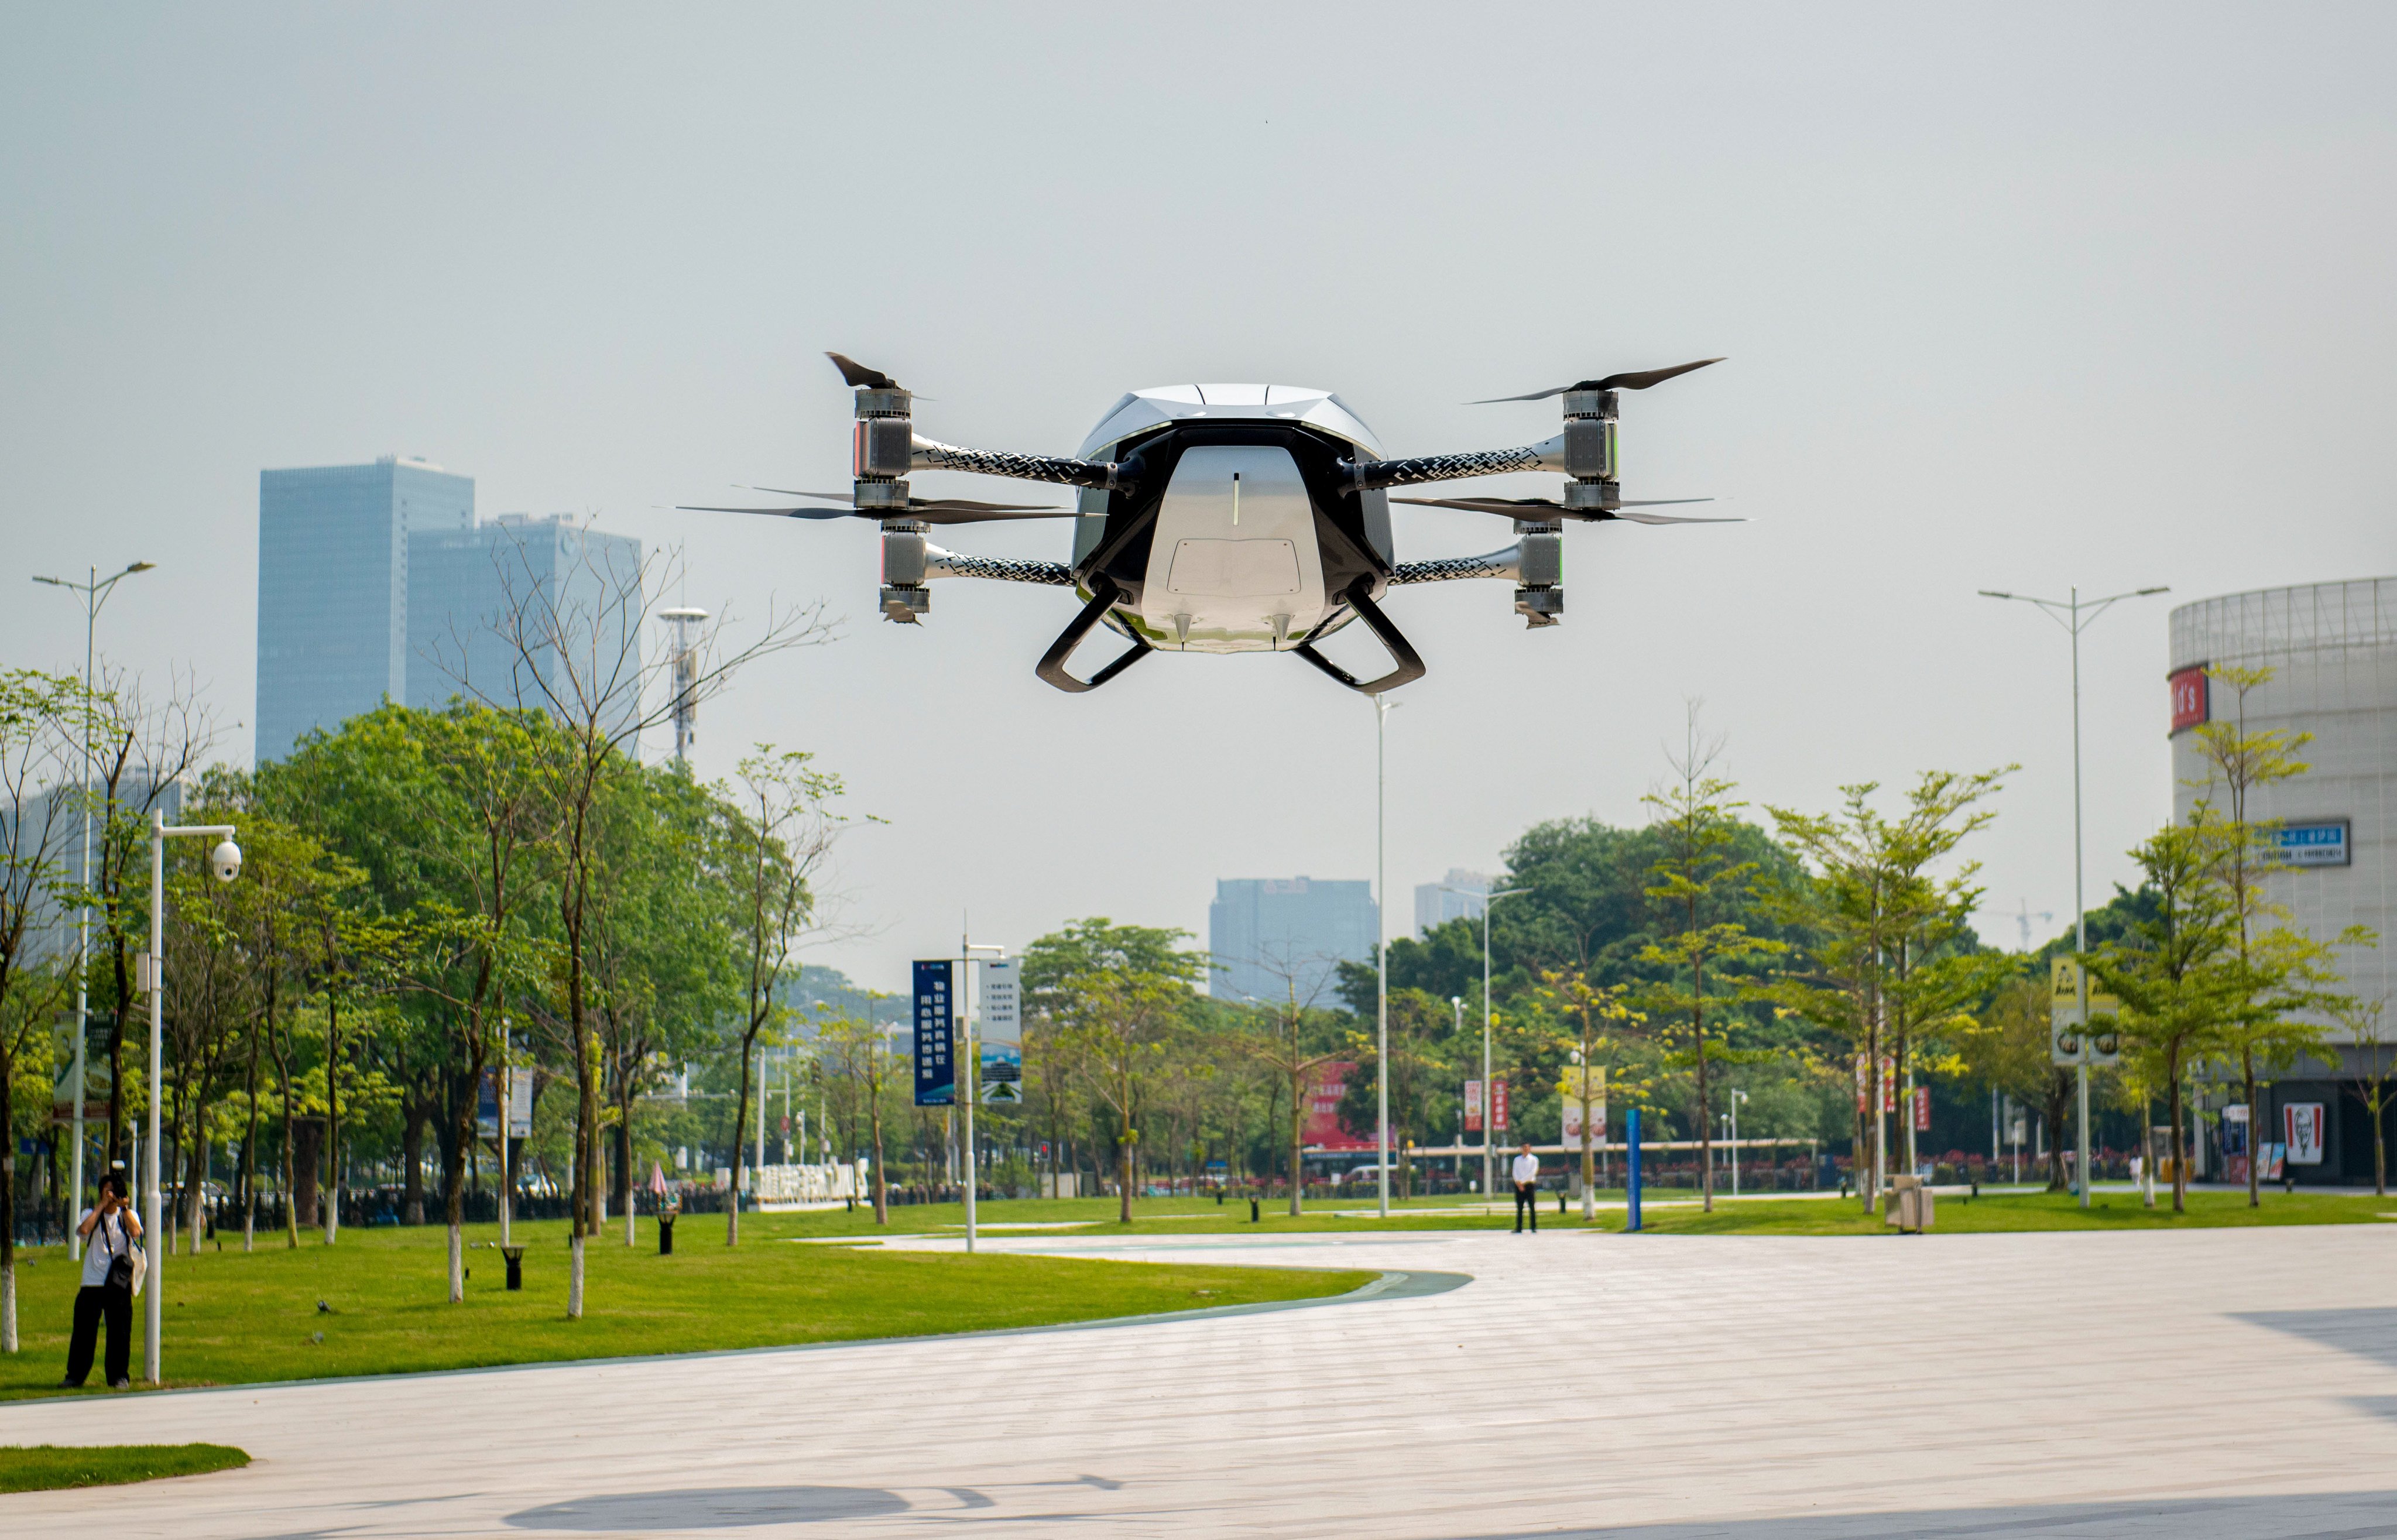 Despite government support for flying taxis, questions about reliablilty and safety remain. Photo: Xinhua